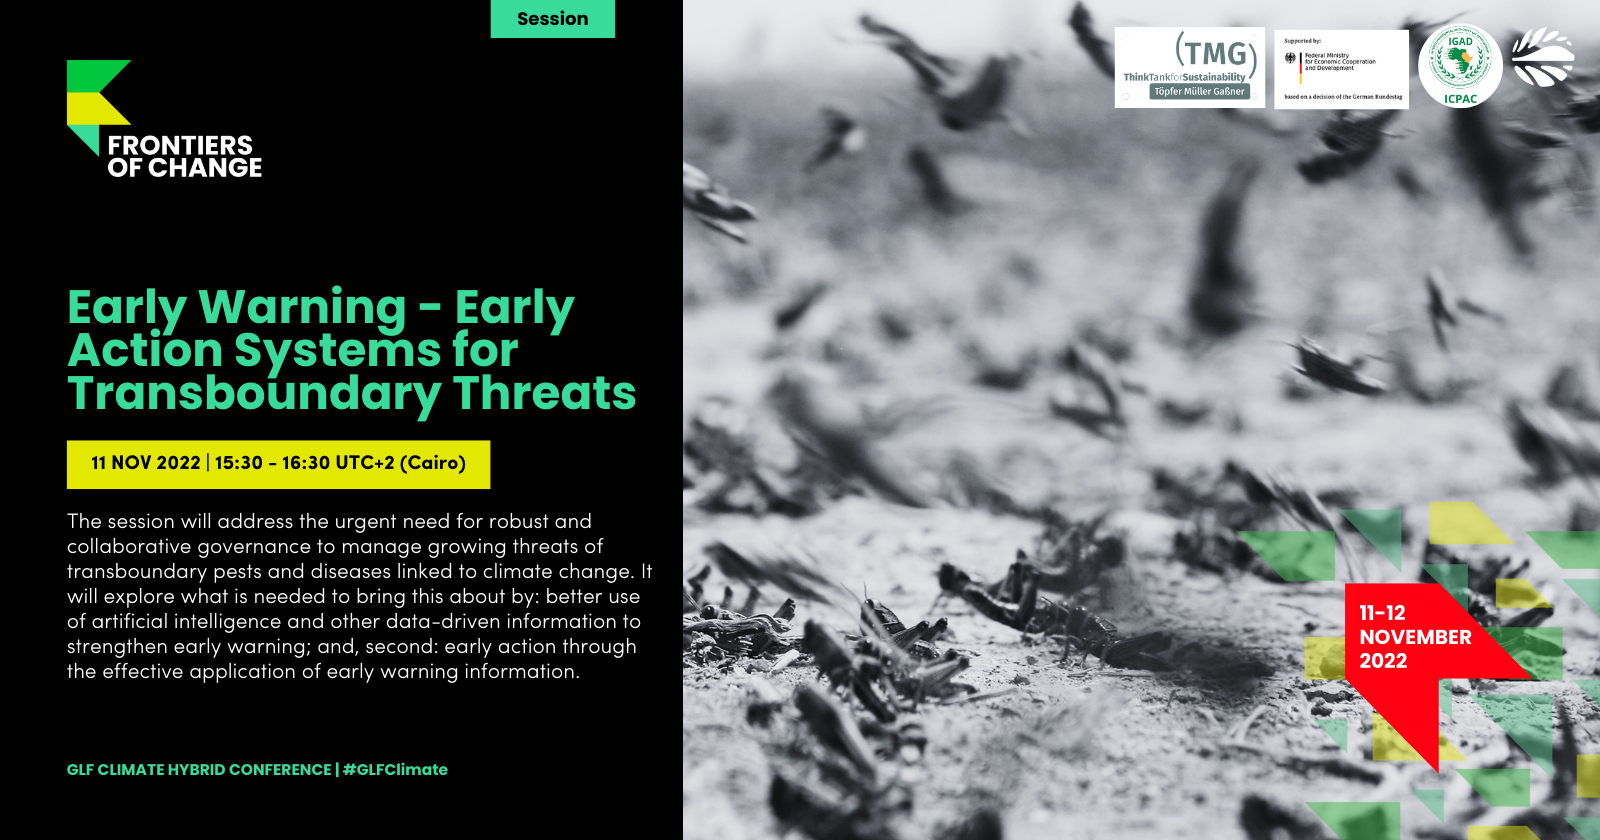 Early Warning-Early Action Systems to address transboundary threats